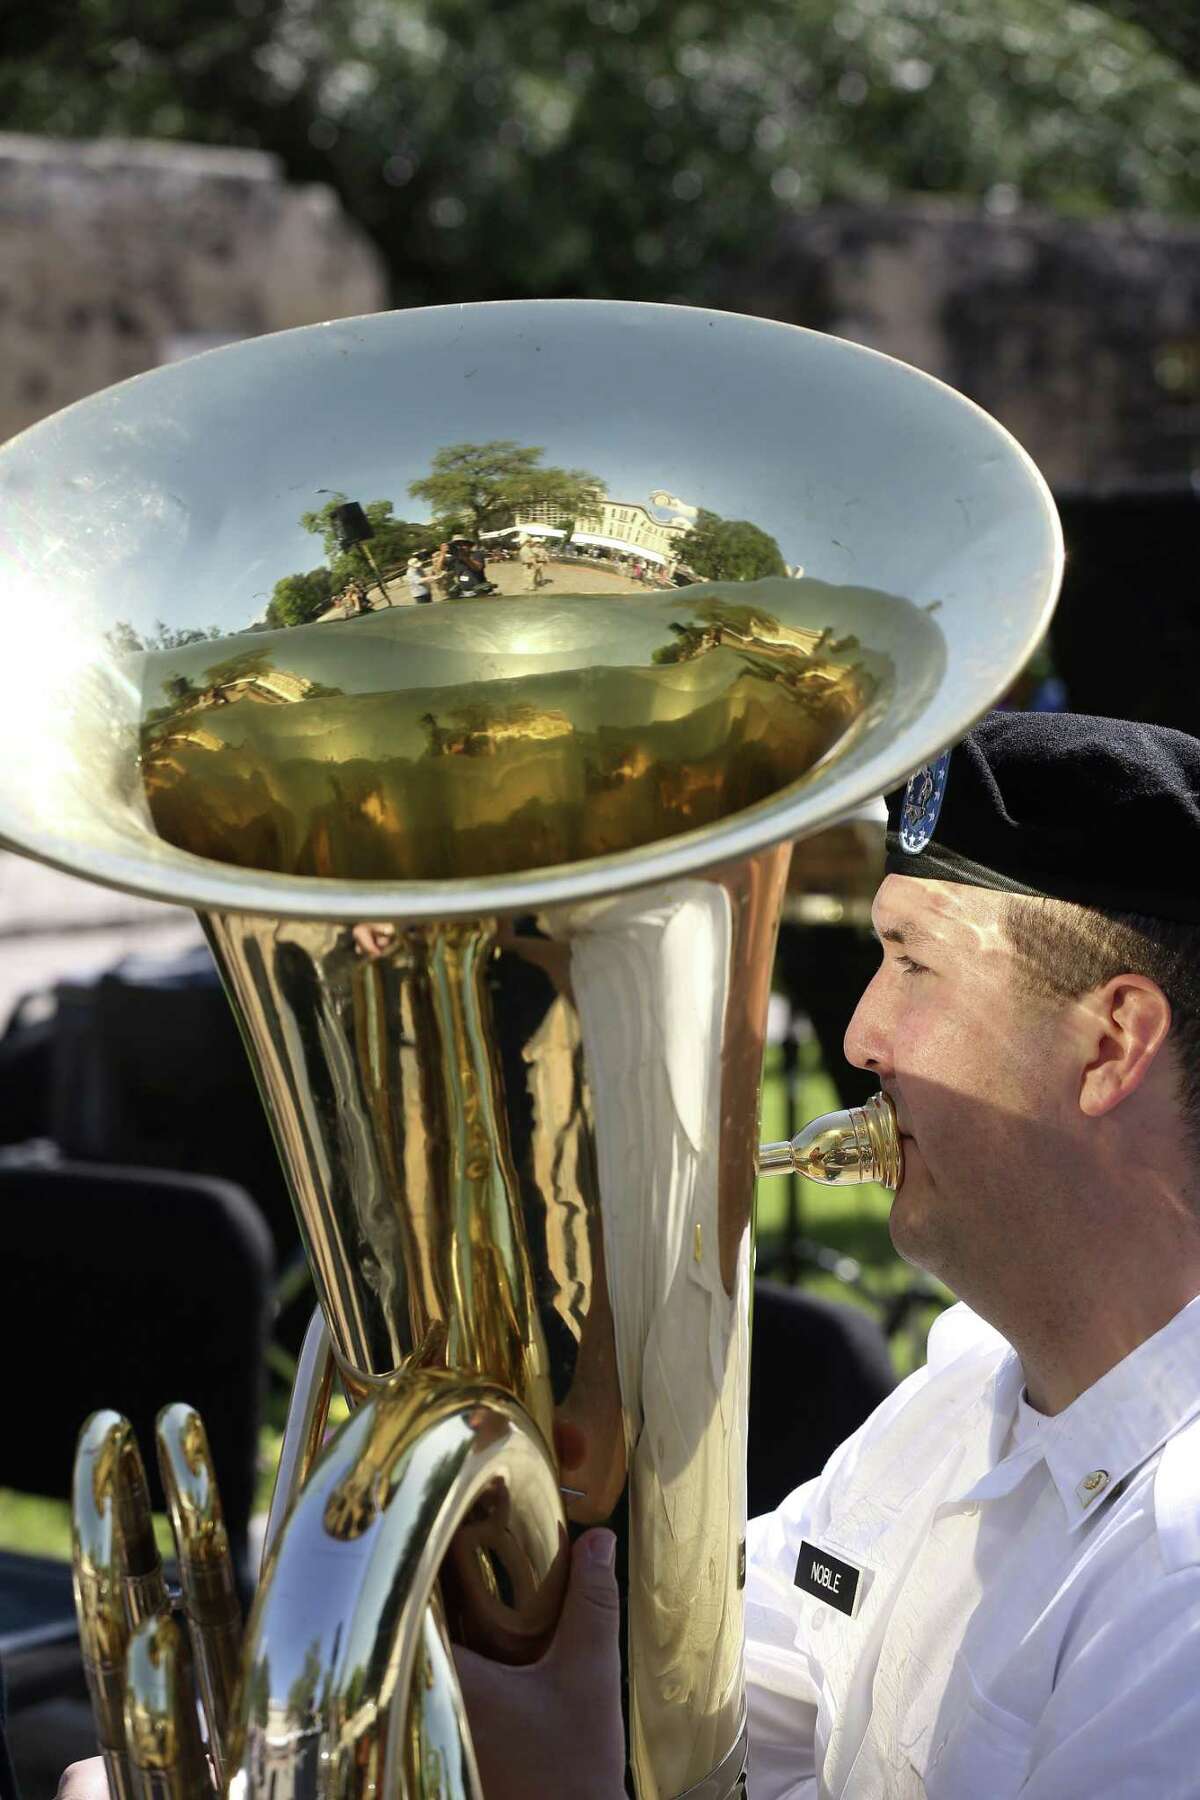 Spc. Andrew Noble, of Alabama, warms up before performing with the 323rd U.S. Army Band, known as " Fort Sam's Own," during Army Day at the Alamo, Tuesday, April 24, 2018. The event, which is part of Fiesta, celebrates the Army's 173 years in San Antonio.